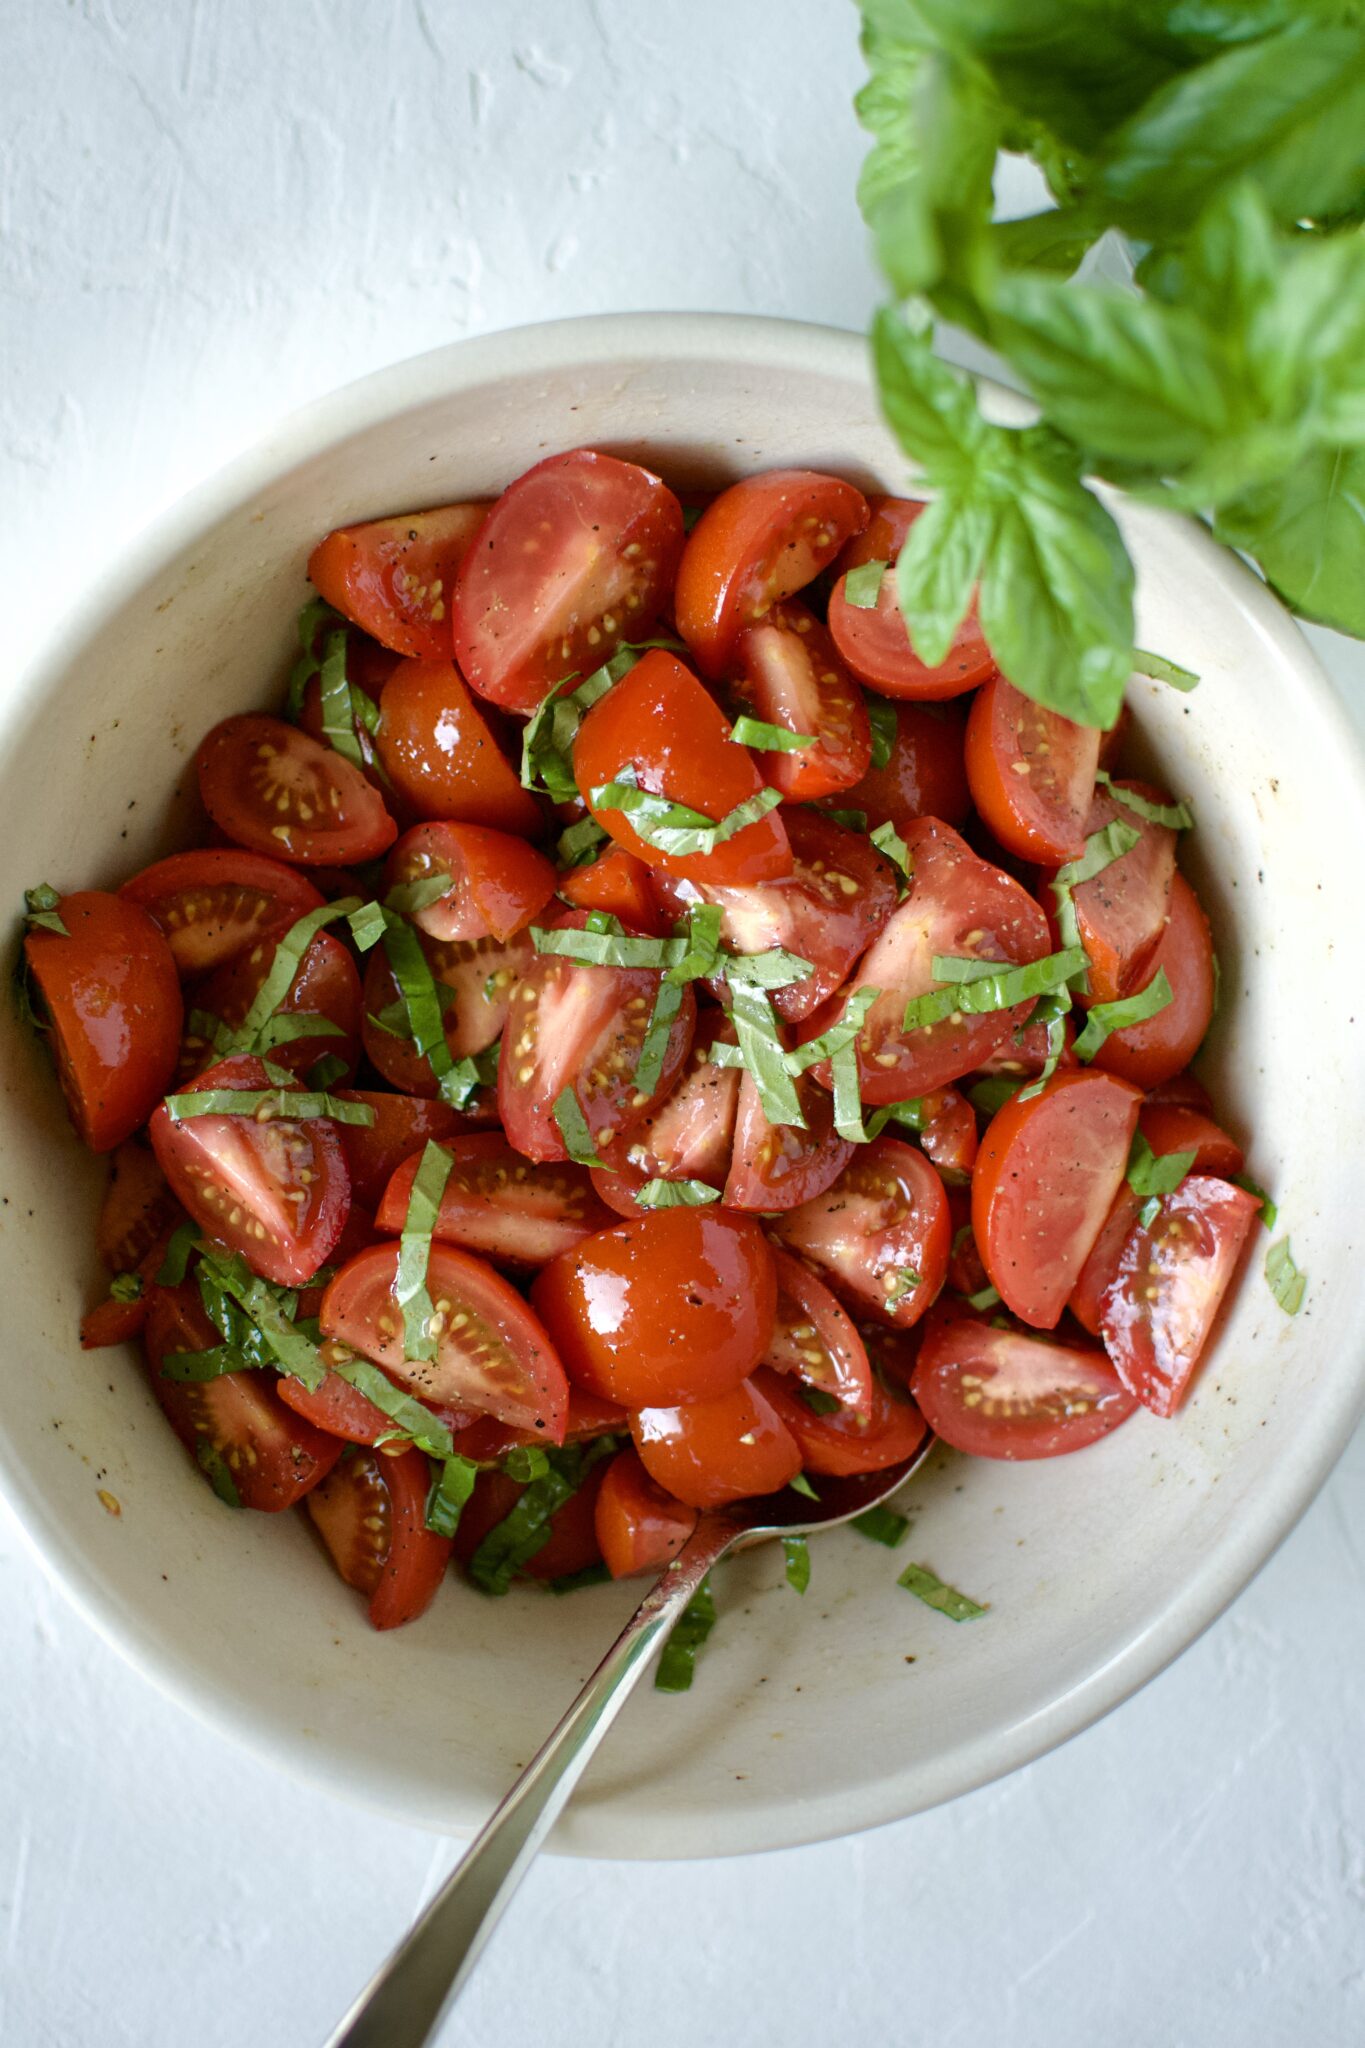 Seasoned tomatoes in a large bowl, tossed with olive oil, seasonings, vinegar, and basil strands.